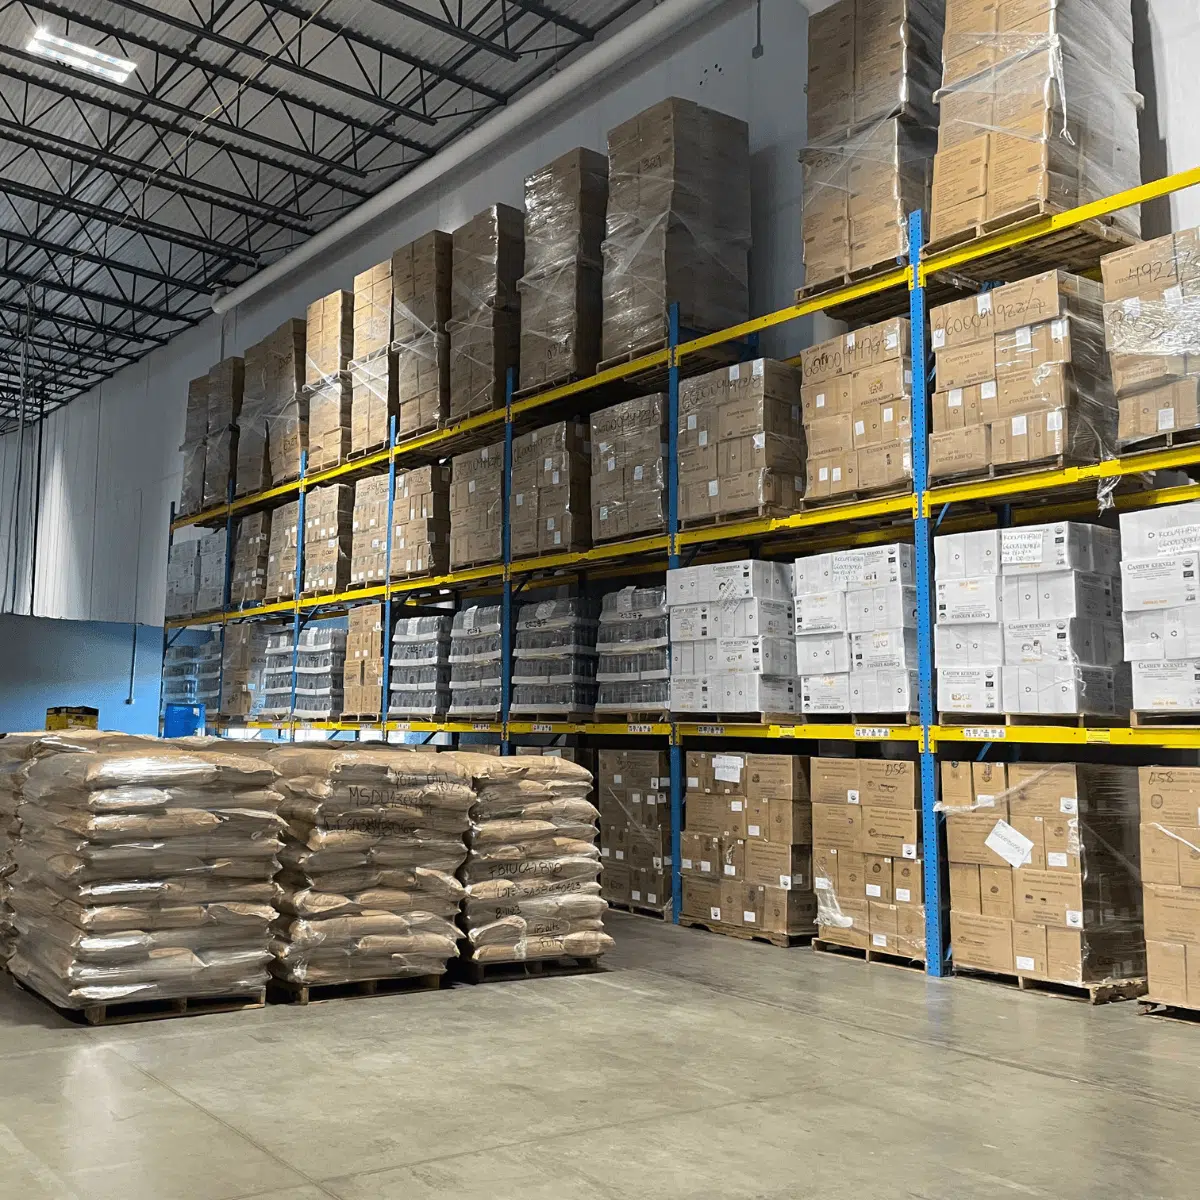 A warehouse filled with stacked boxes and shelves, ready for storage and organization.